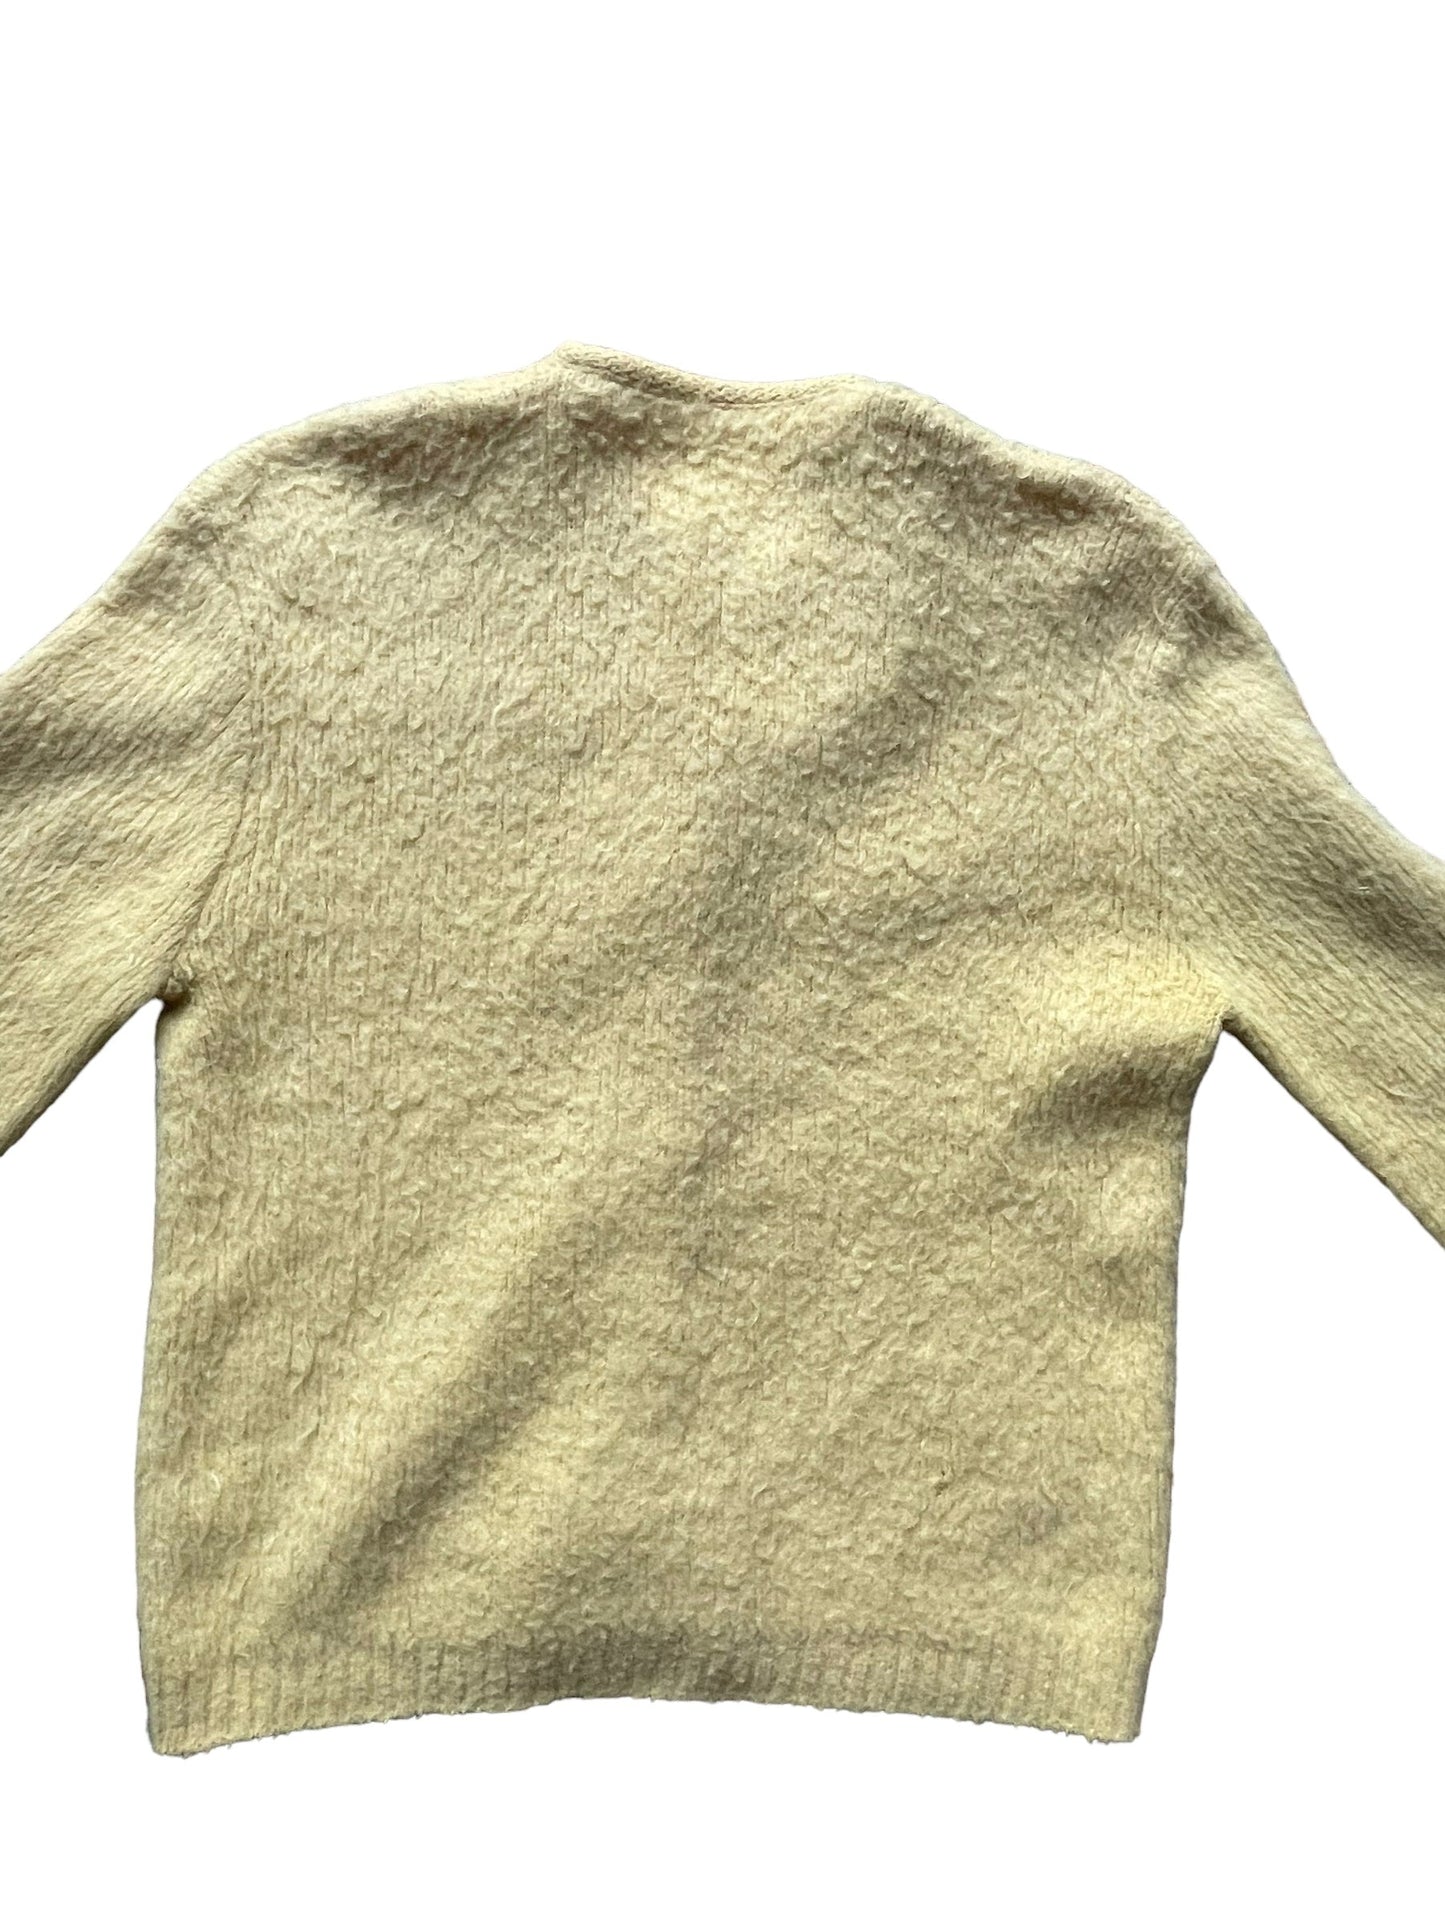 Ful lback view of Vintage 1950s Yellow Orlon Mohair Cardigan | Barn Owl Sweaters | Seattle Vintage